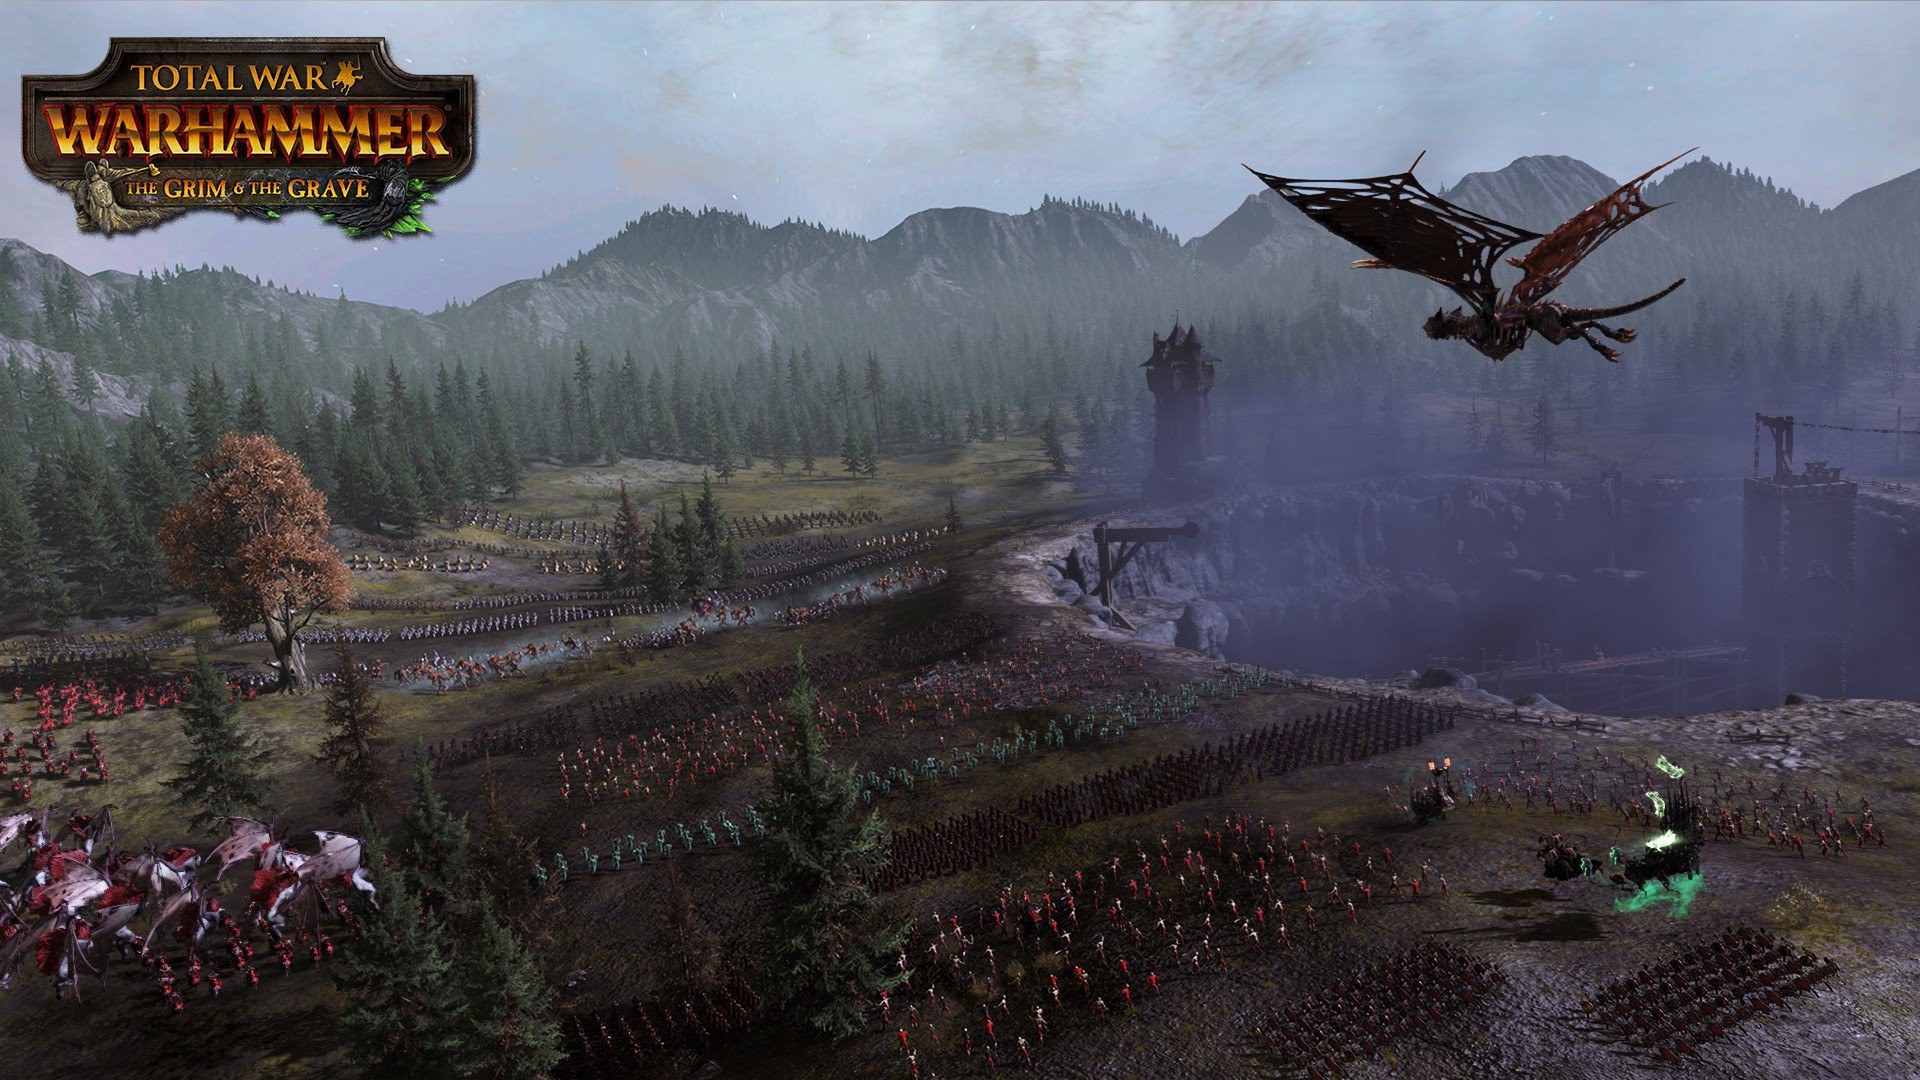 Total war: warhammer - the grim and the grave download free version